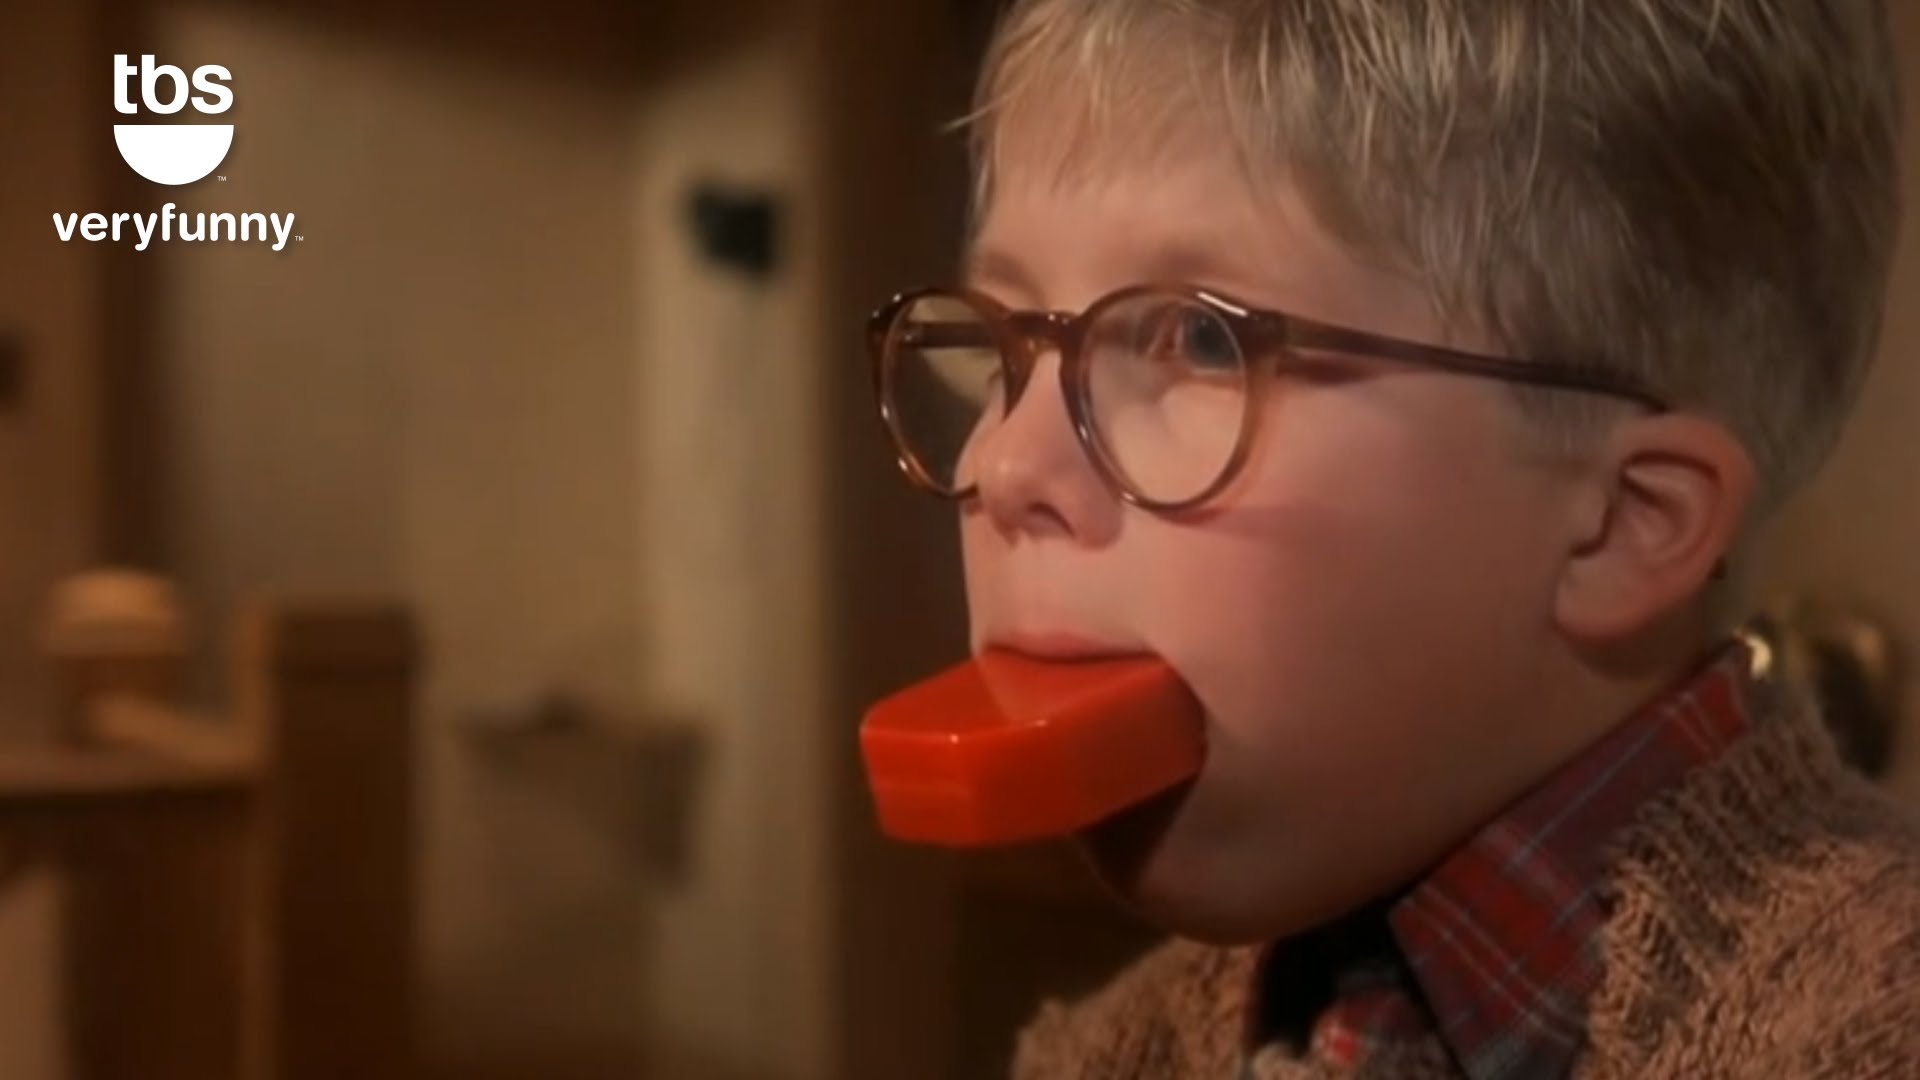 A Christmas Story Backgrounds, Compatible - PC, Mobile, Gadgets| 1920x1080 px